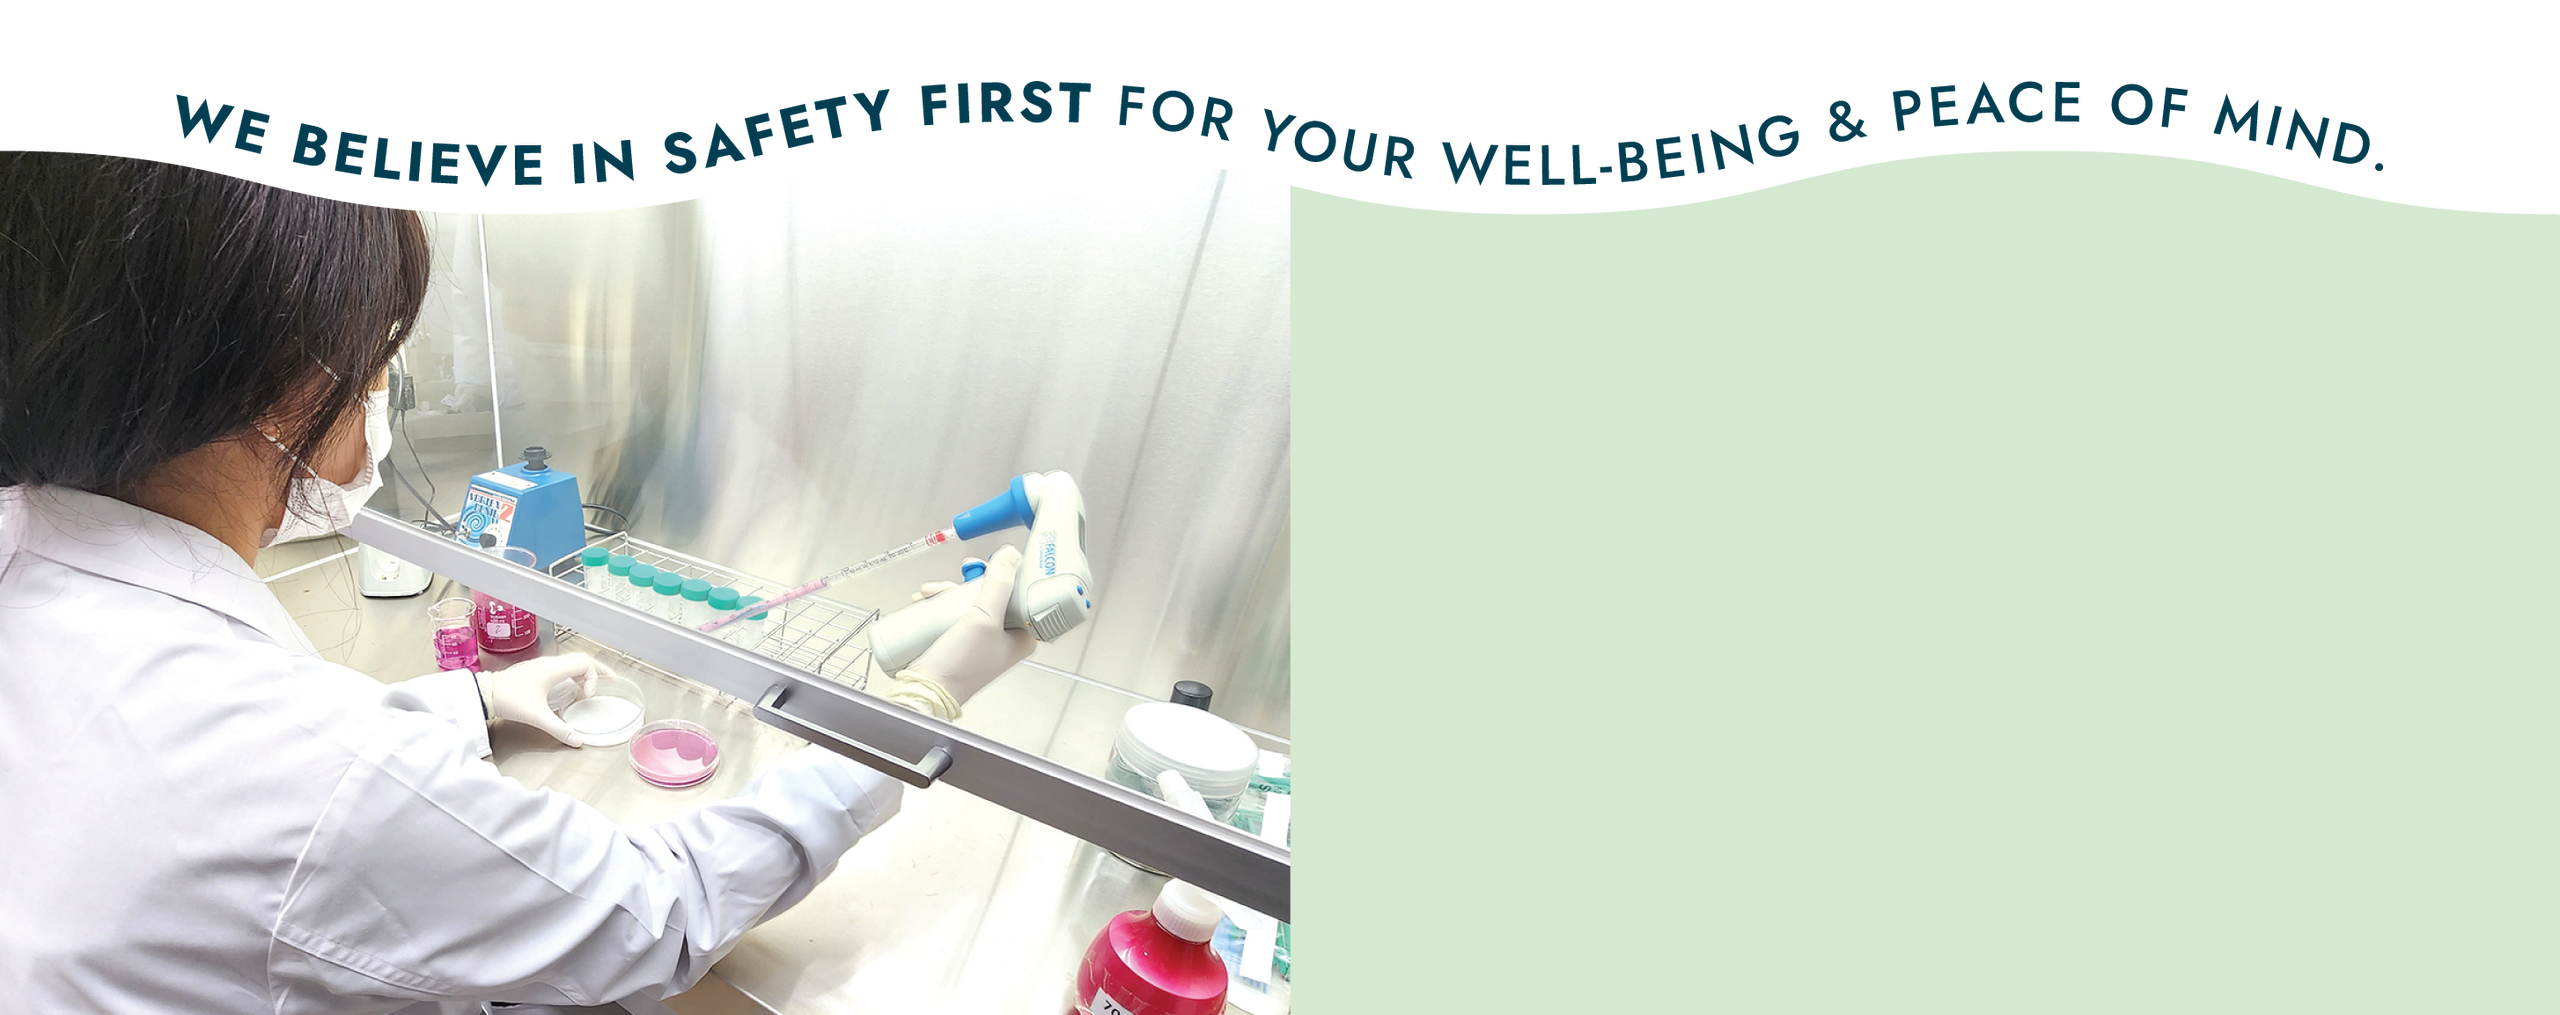 We Believe in safety first for your well-being and peace of mind text with image of woman in a testing lab and a light green background